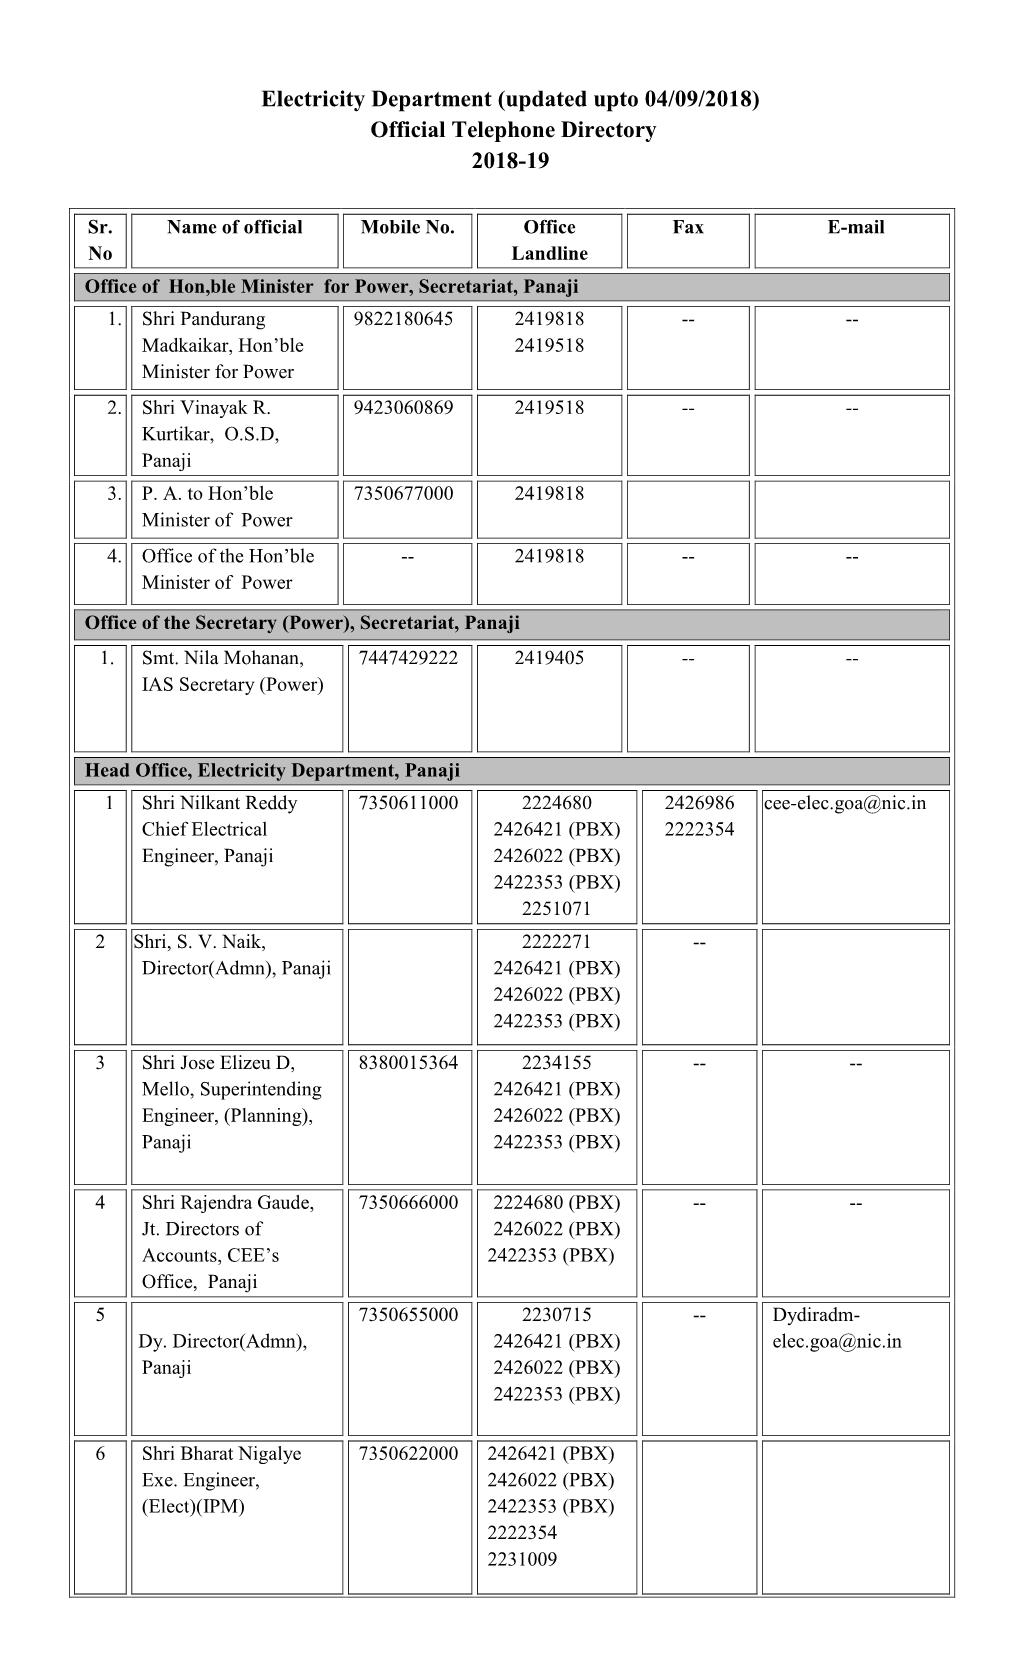 Electricity Department (Updated Upto 04/09/2018) Official Telephone Directory 2018-19